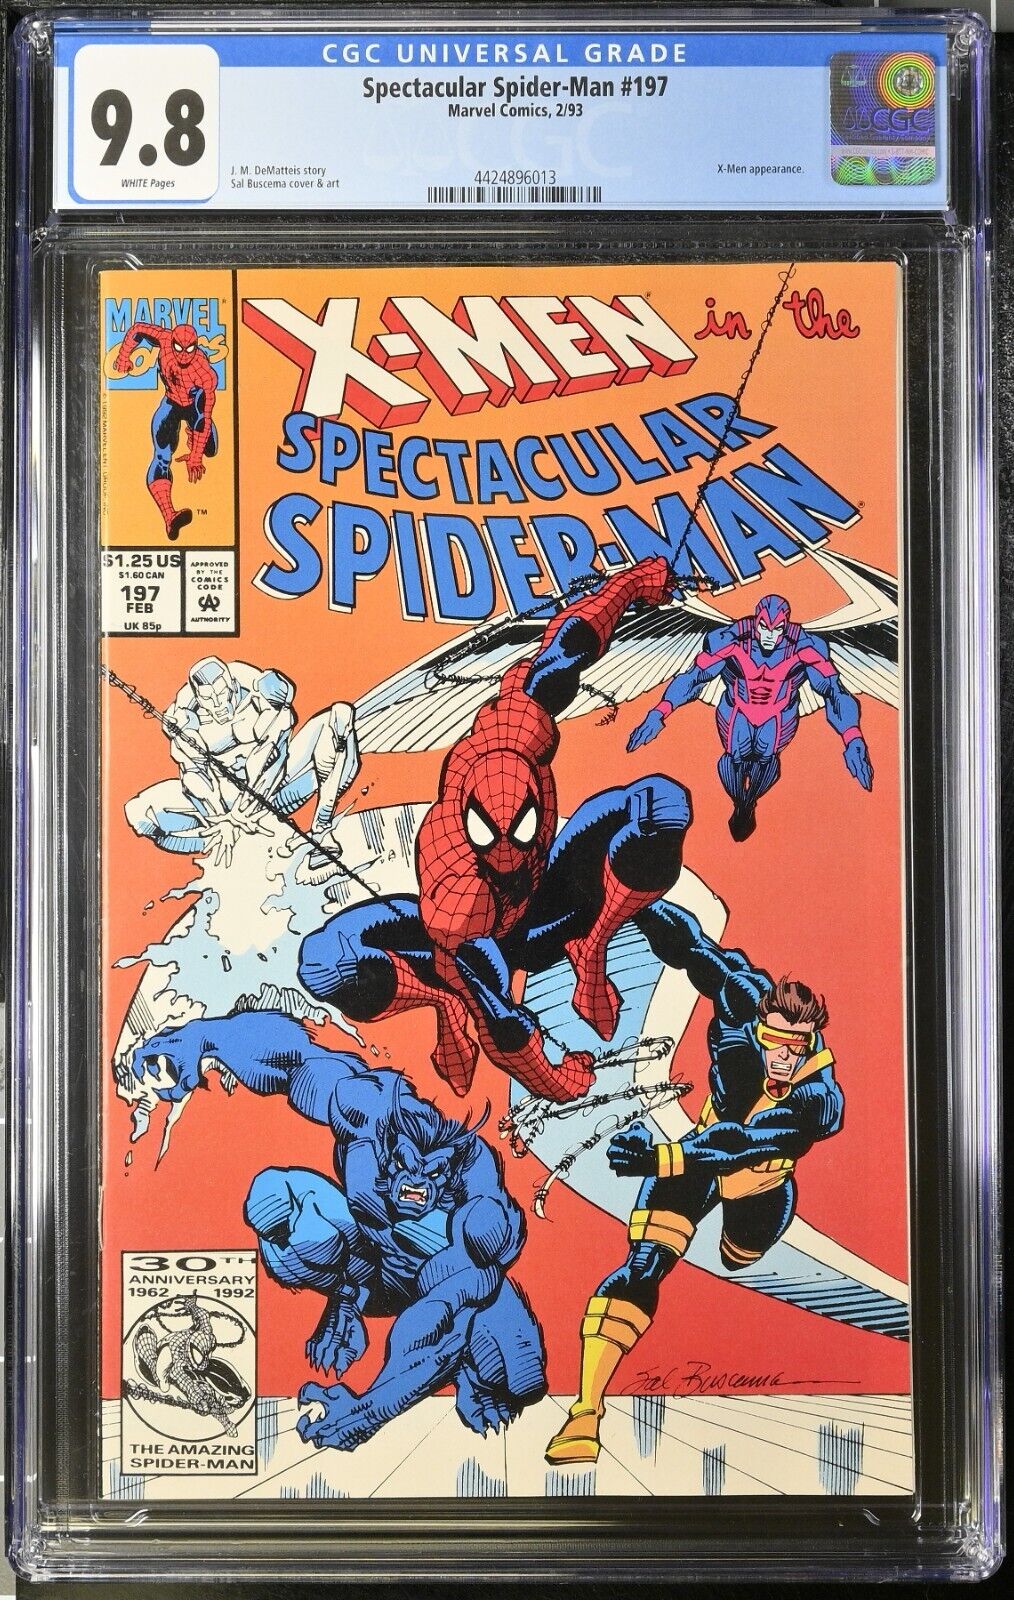 Spectacular Spider-Man #197 CGC 9.8 X-Men appearance Buscema Cover 1993 Marvel